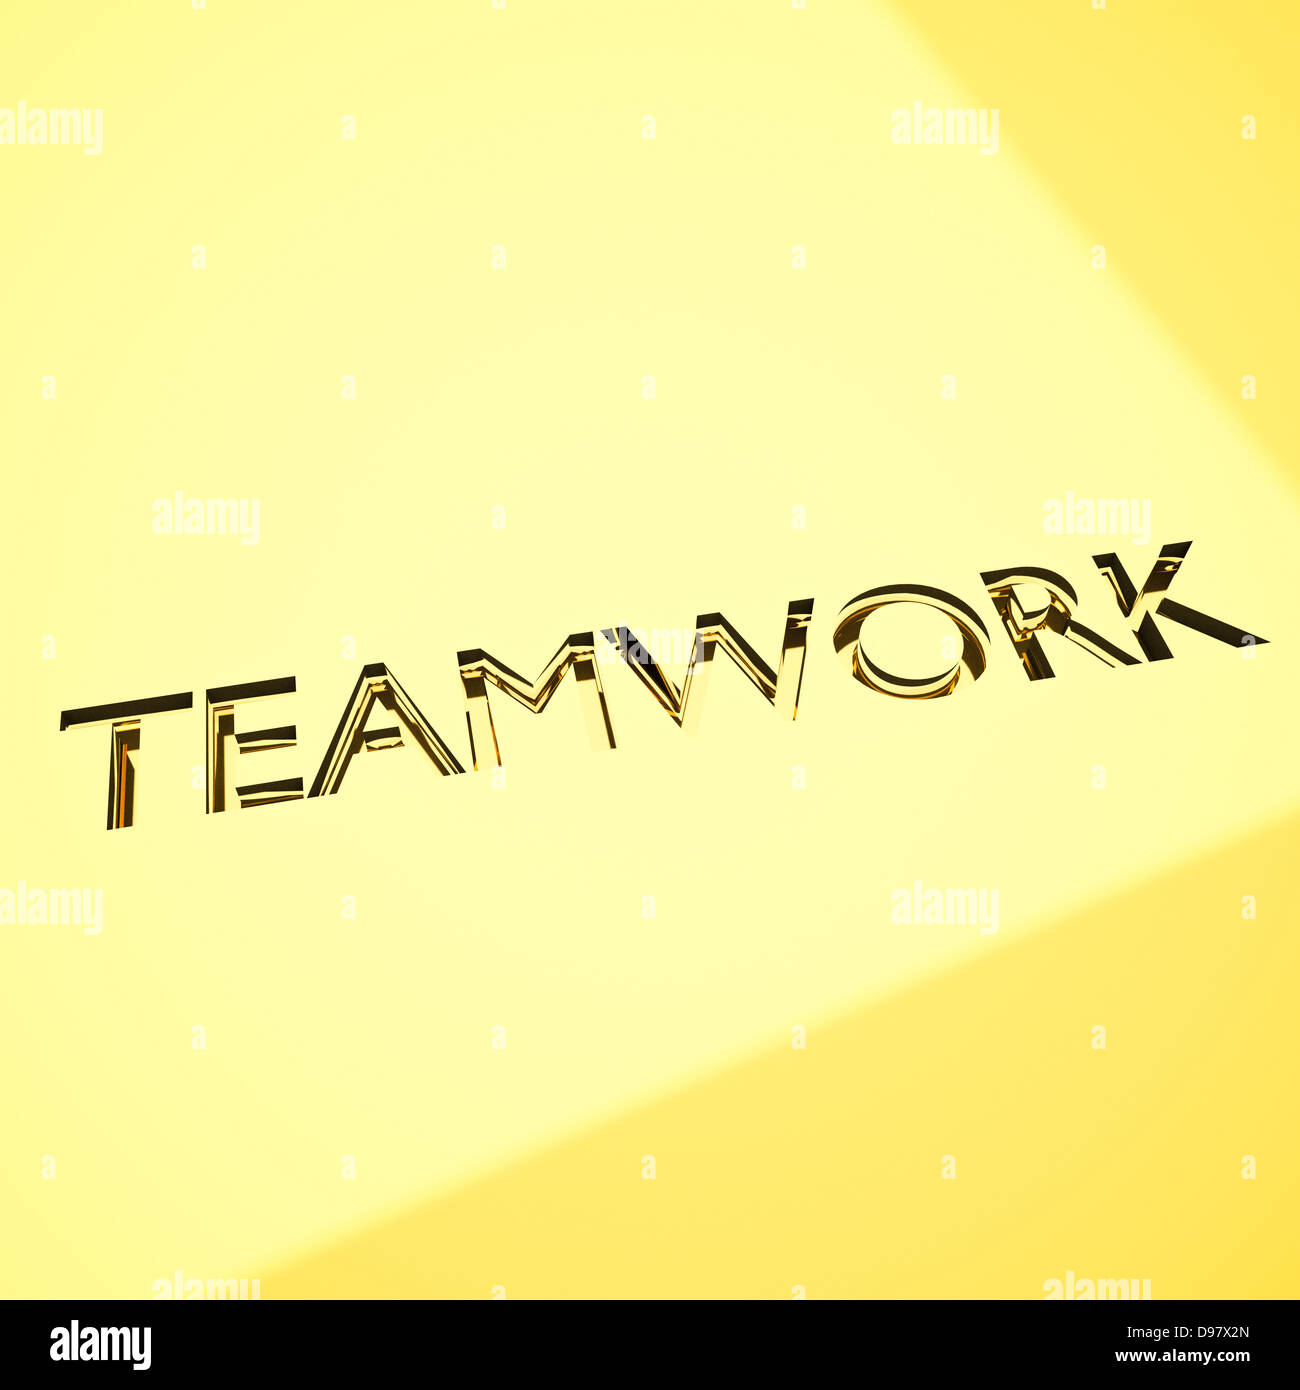 teamwork definition on gold engraving, for business concepts. Stock Photo